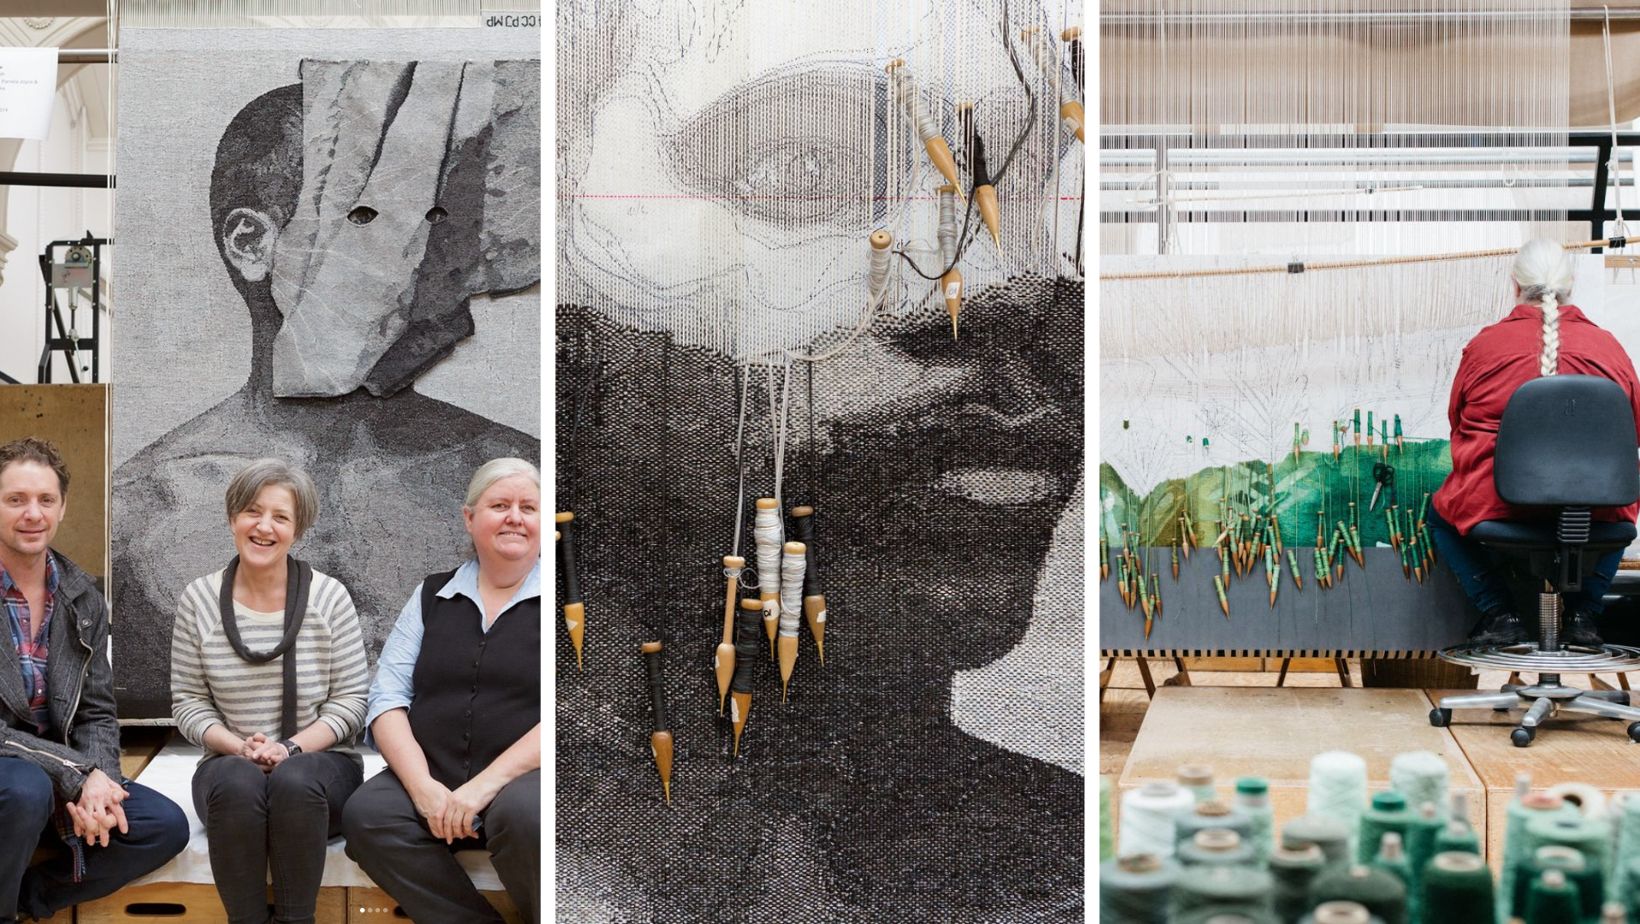 Triptych of Chris Cochius with artist Brook Andrew and fellow weaver Pamela Joyce; detail of 'Catching Breath' designed by Brook Andrew in progress; and Chris Cochius weaving 'Hear the Plant Song' 2020, designed by Janet Laurence.